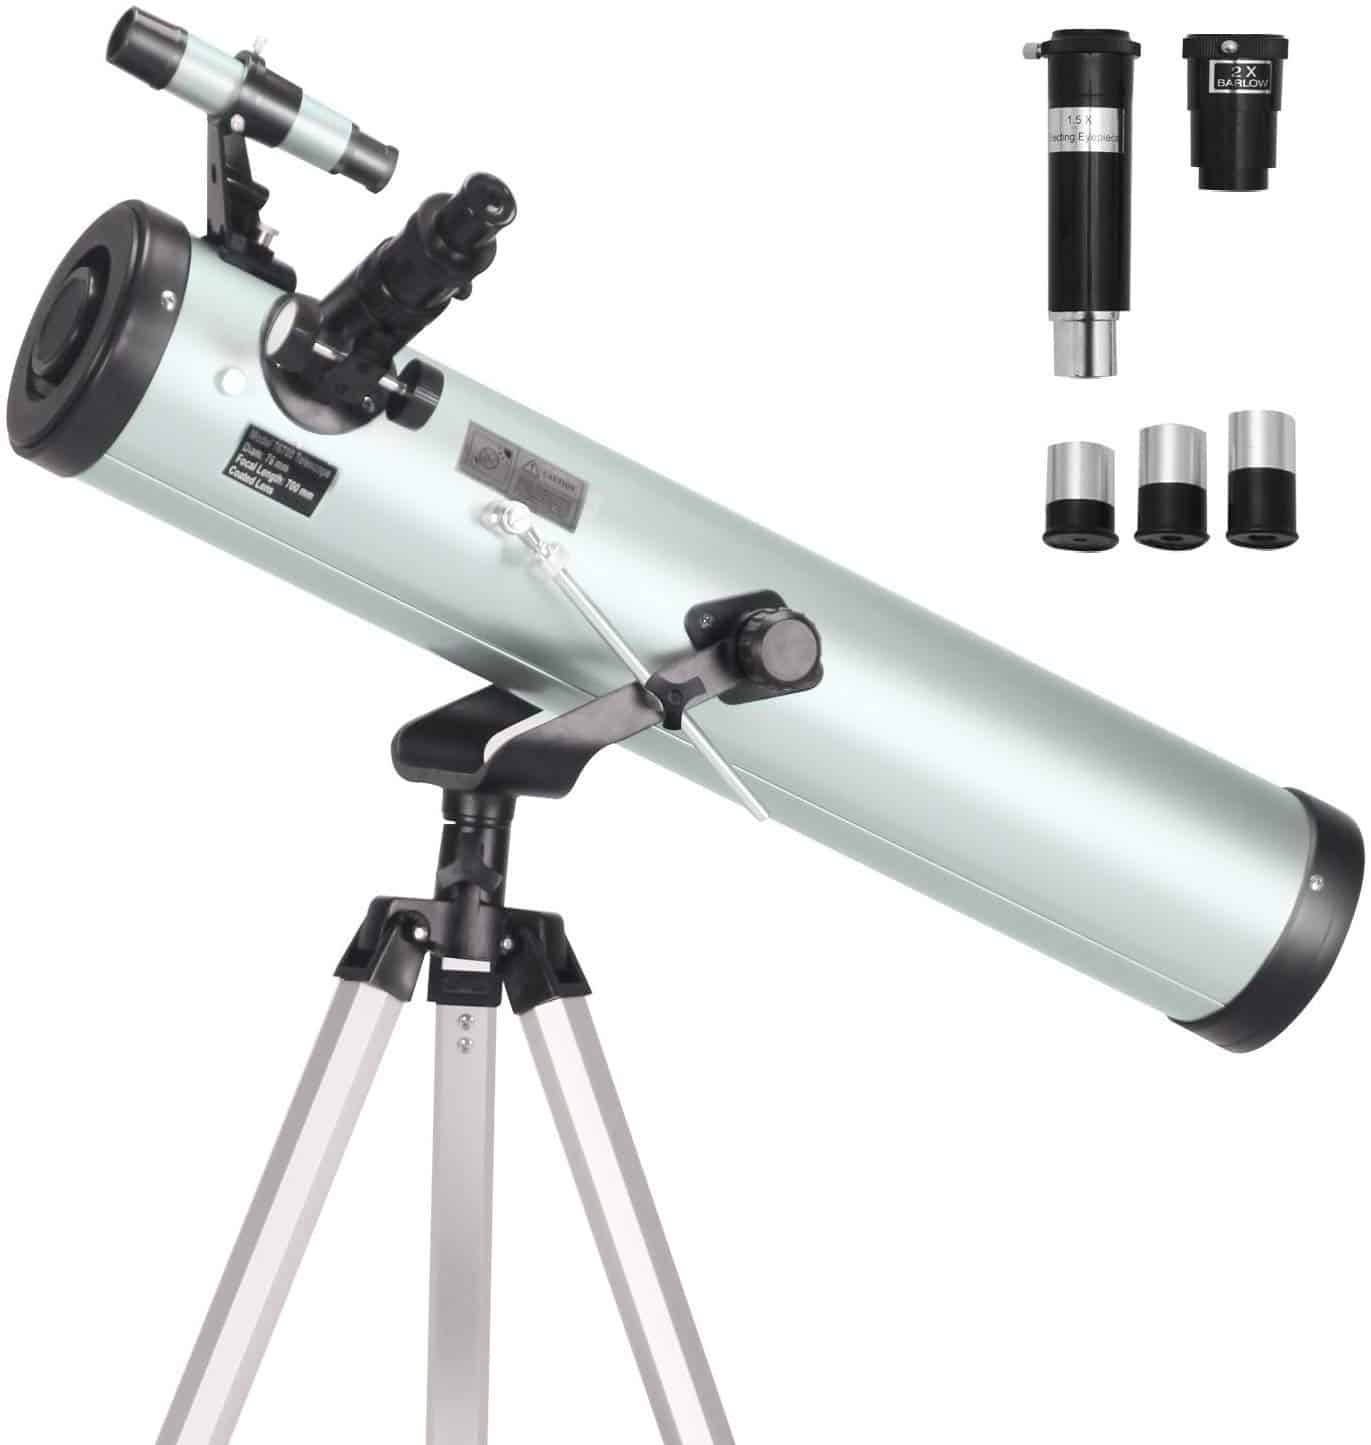 Yufee Science Telescope for Kids Beginners,Starscope Monocular Tripod 3 Eyepieces Portable for Children,Astronomical Telescope for Astronomy Beginners Birthday 2021 Gifts 